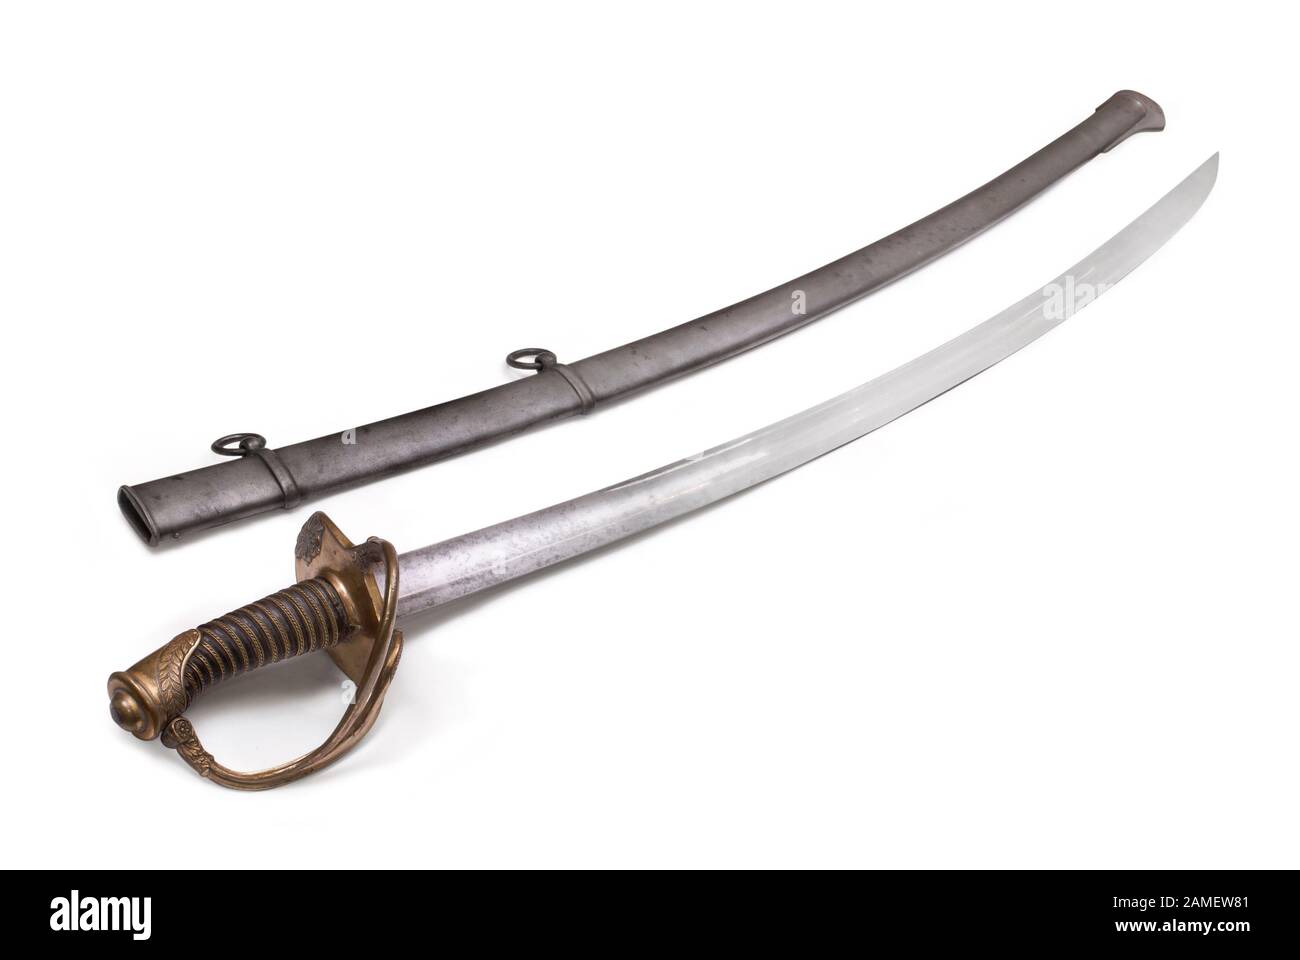 French officer saber (sabre).The 19th century. France. Path on the white background. Stock Photo